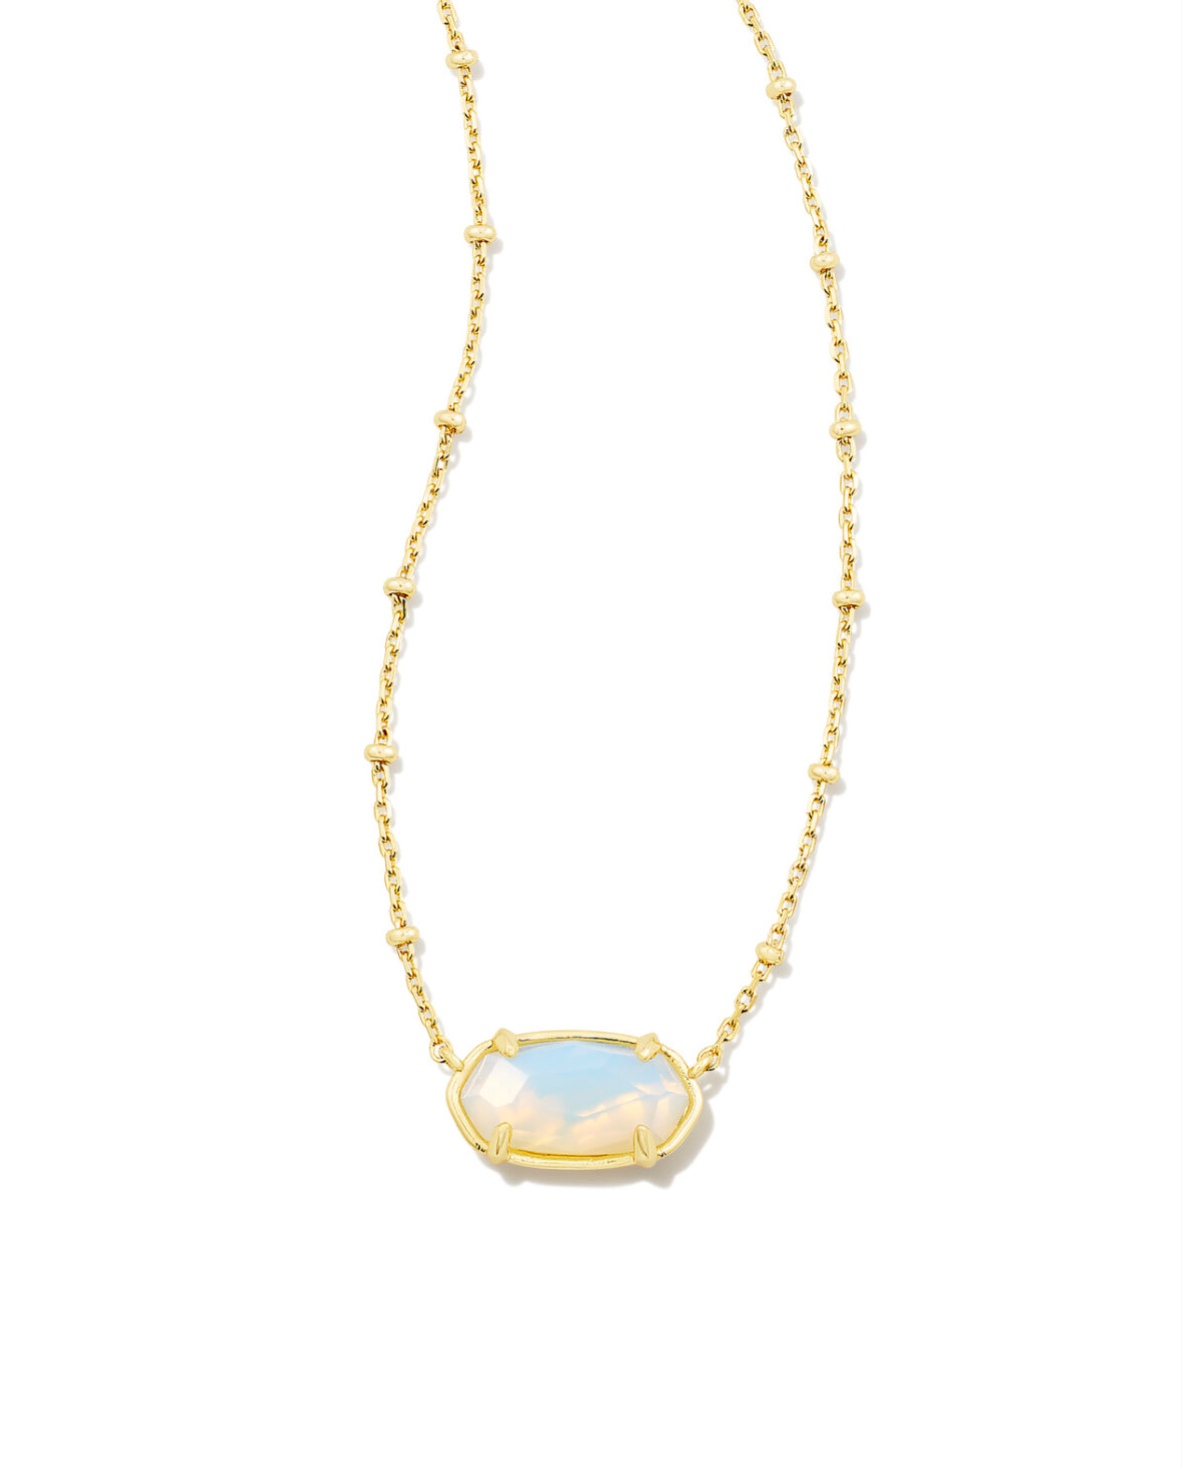 Faceted Elisa Pendant Necklace in Iridescent Opalite Illusion